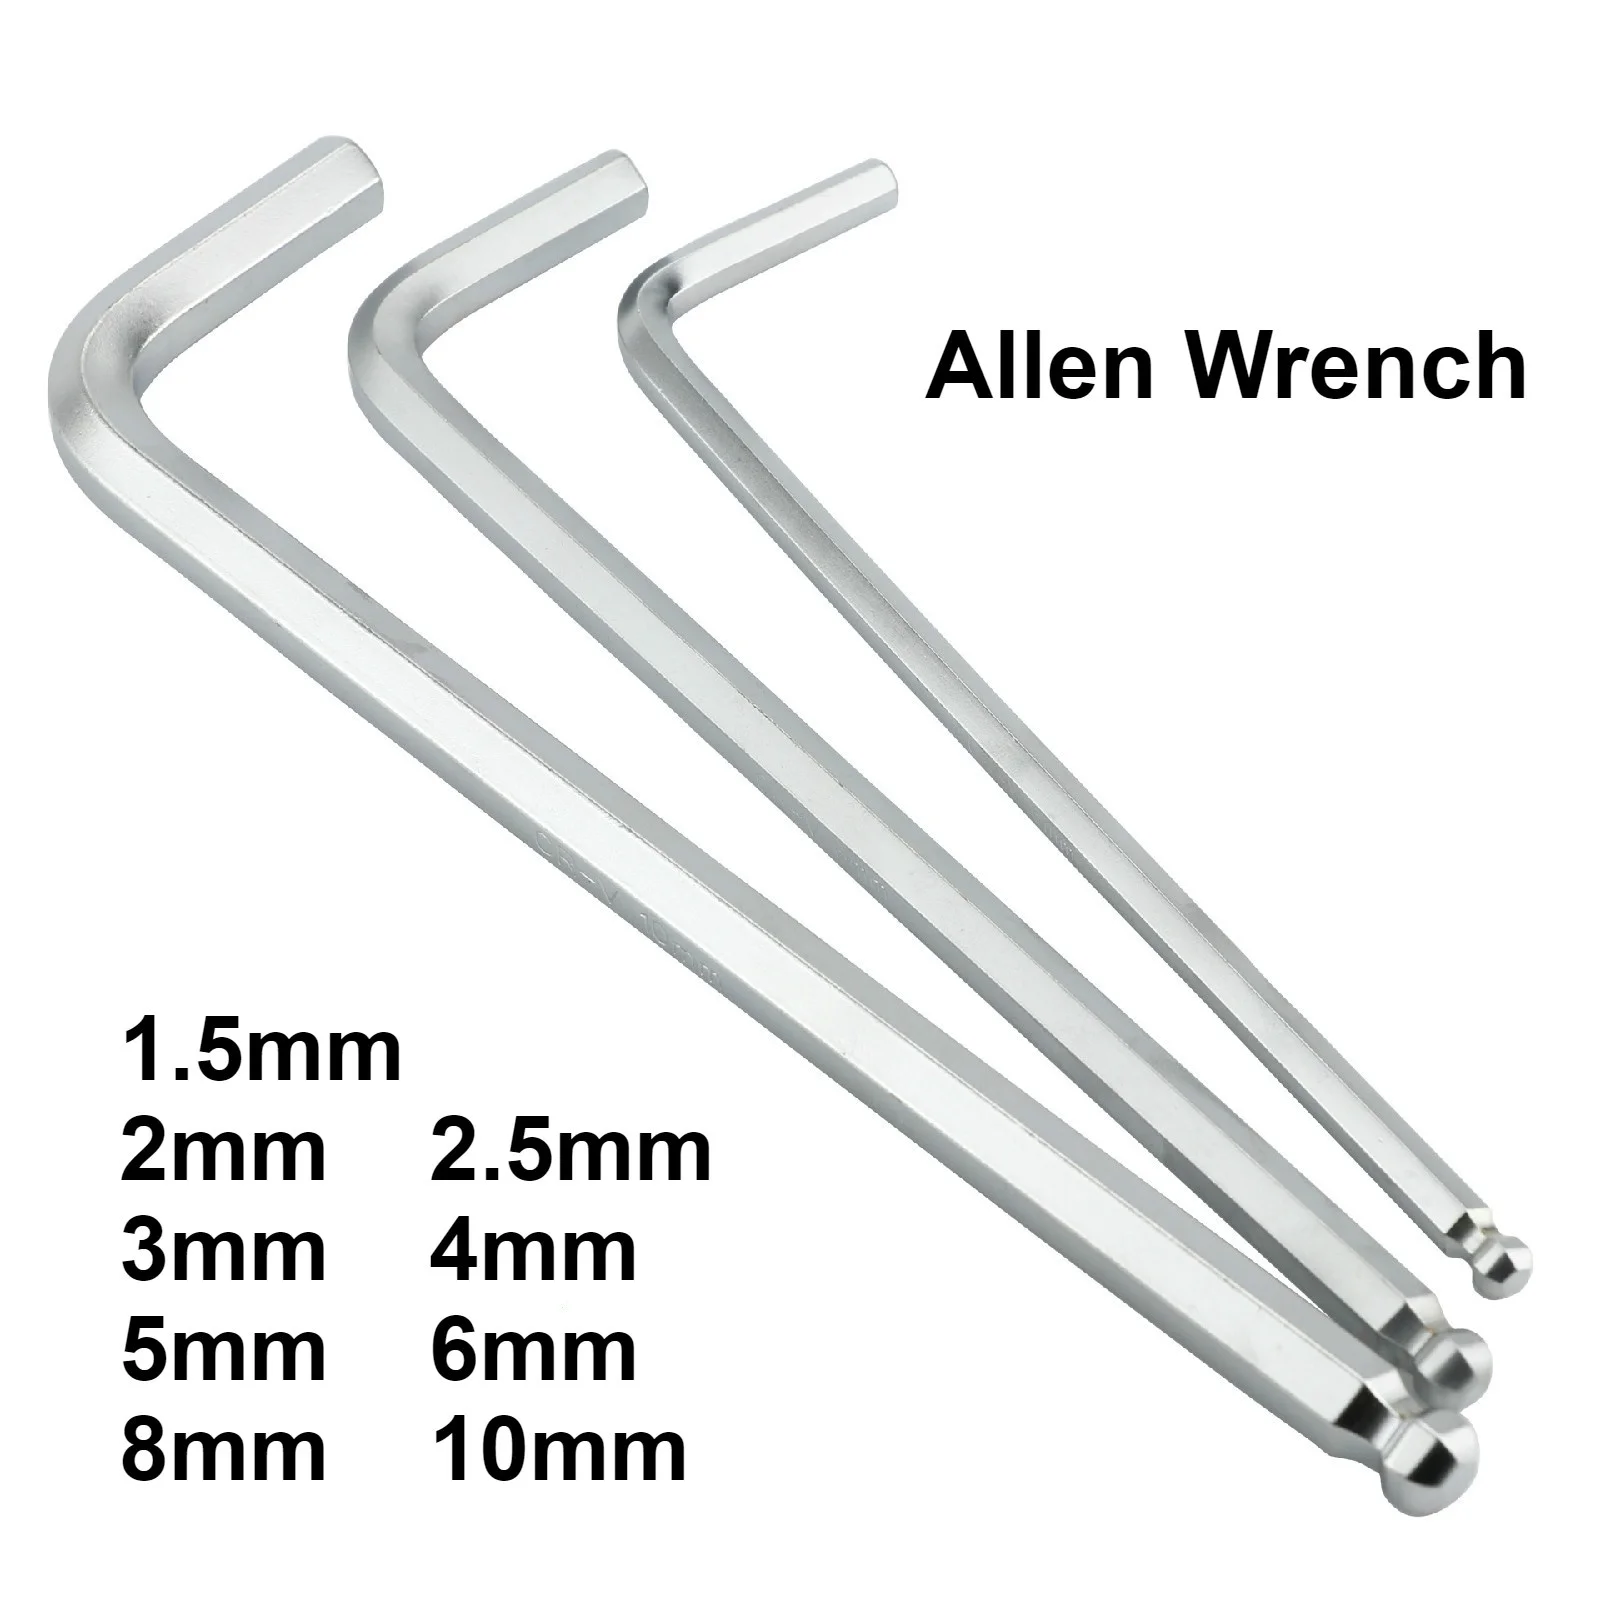 Professional Allen Wrench 1.5mm 2mm 2.5mm 3mm 4mm 5mm 6mm 8mm 10mm is available